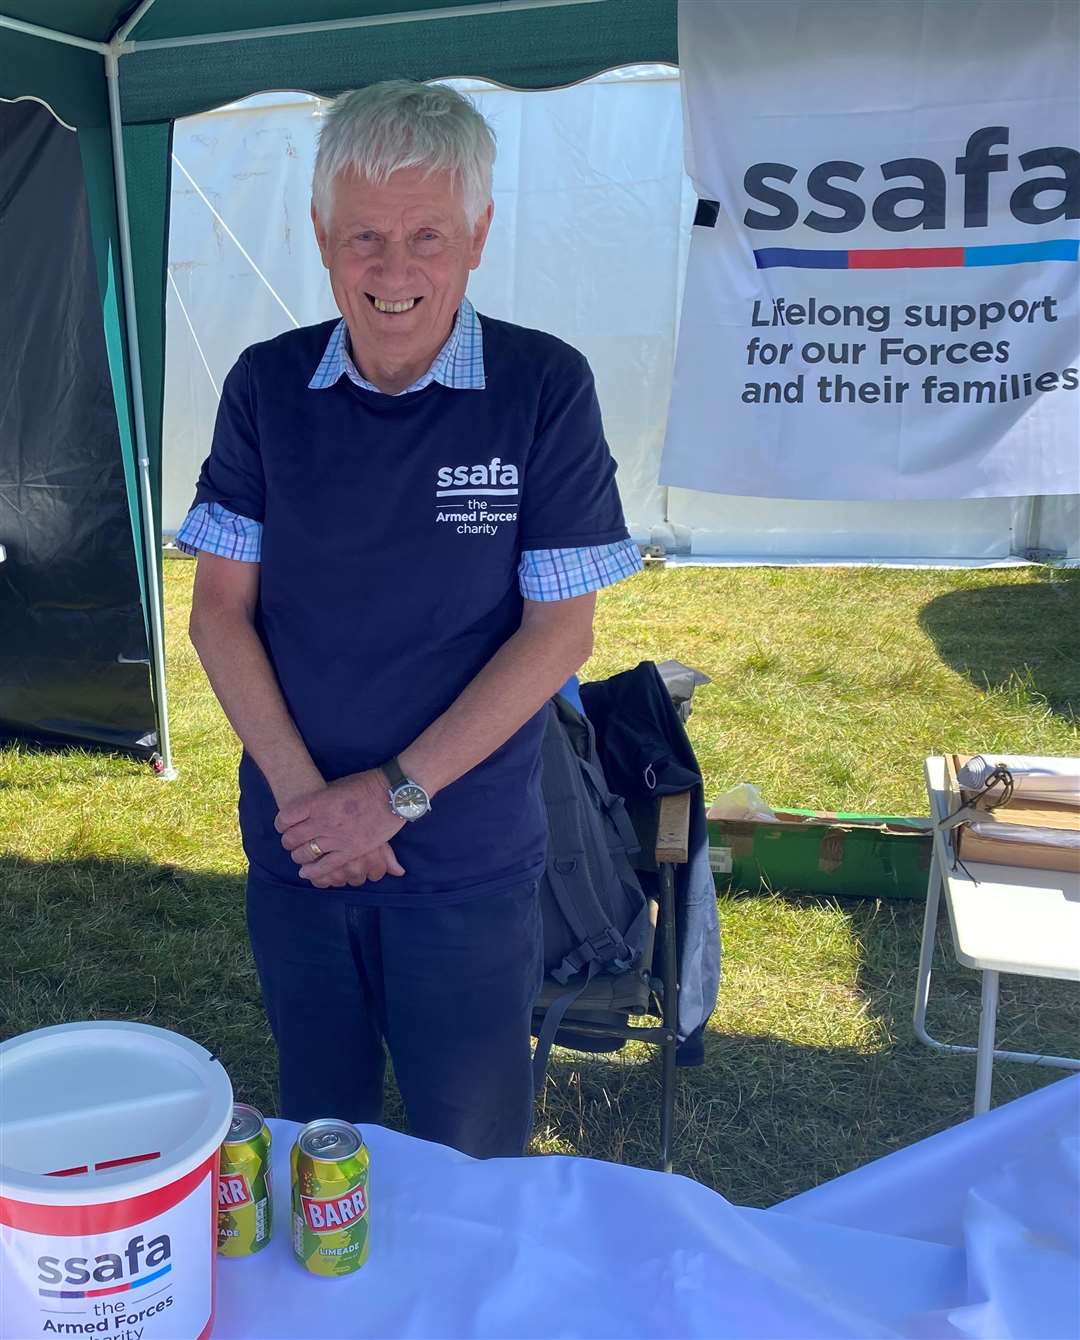 Alisdair hard at work on the SSAFA stall during this summer's Highland Games season.